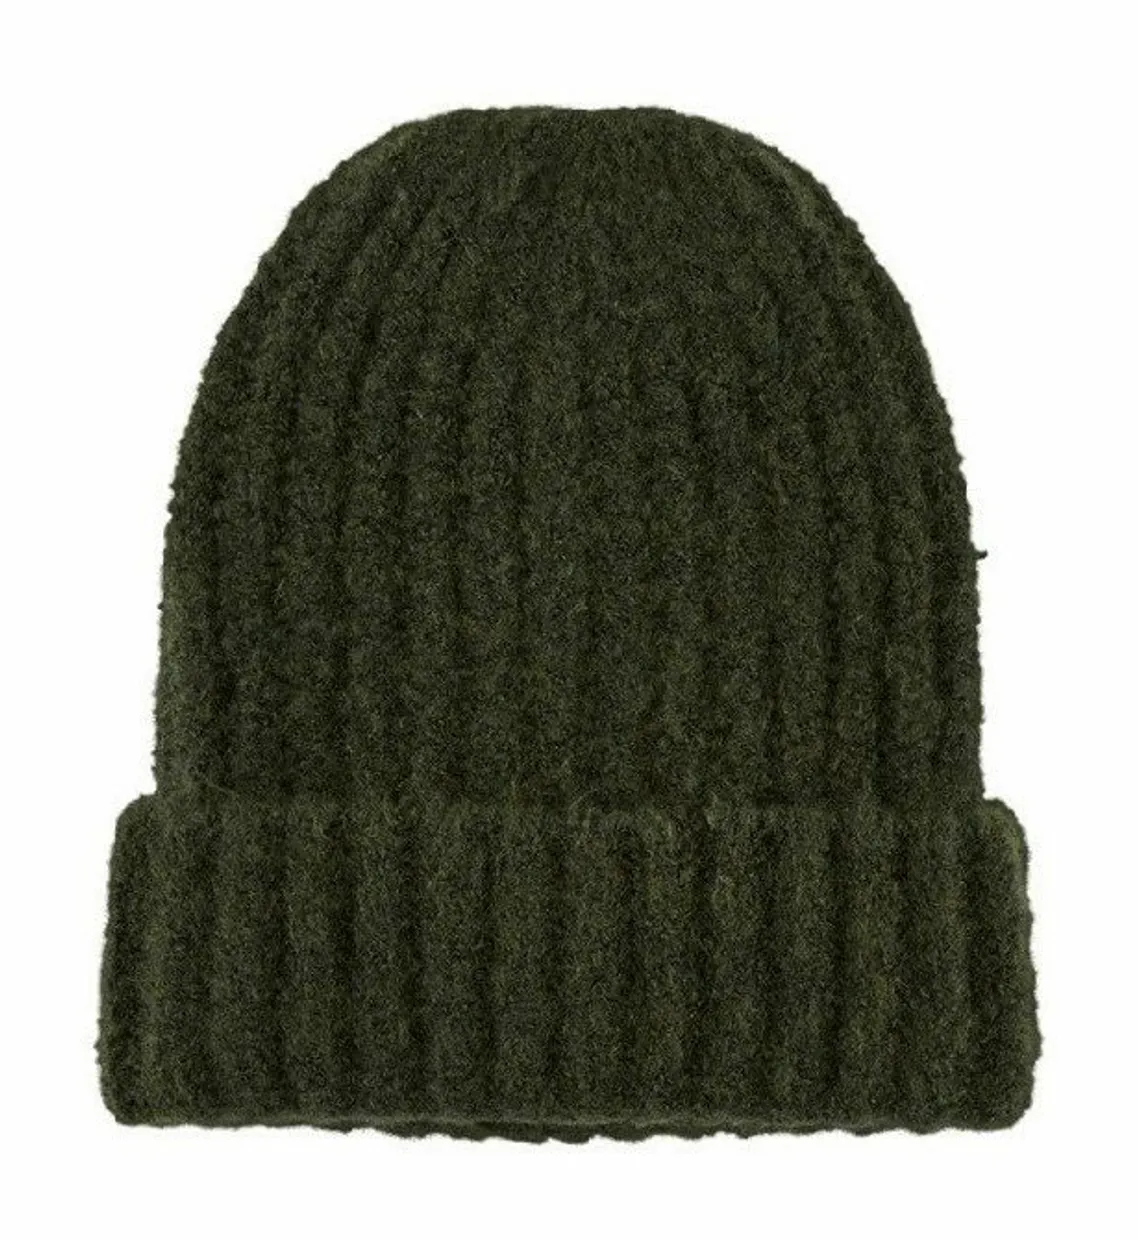 Pyron structure beanie army Army